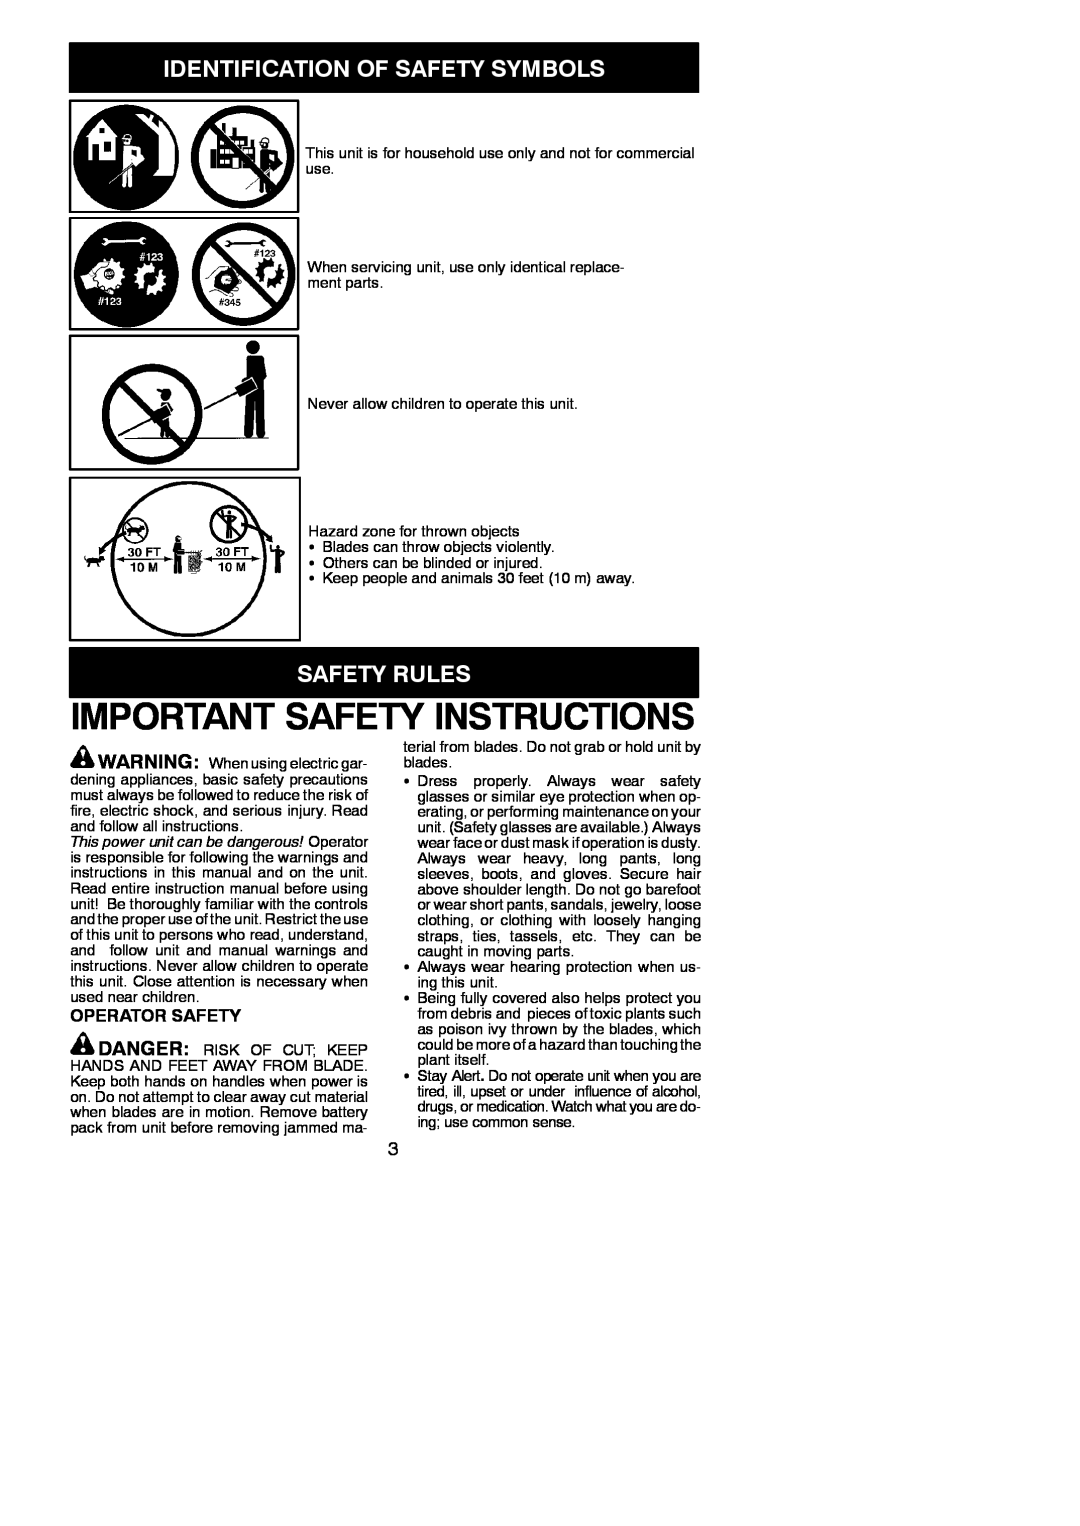 Weed Eater 545117506 Important Safety Instructions, Safety Rules, Identification Of Safety Symbols, Operator Safety 